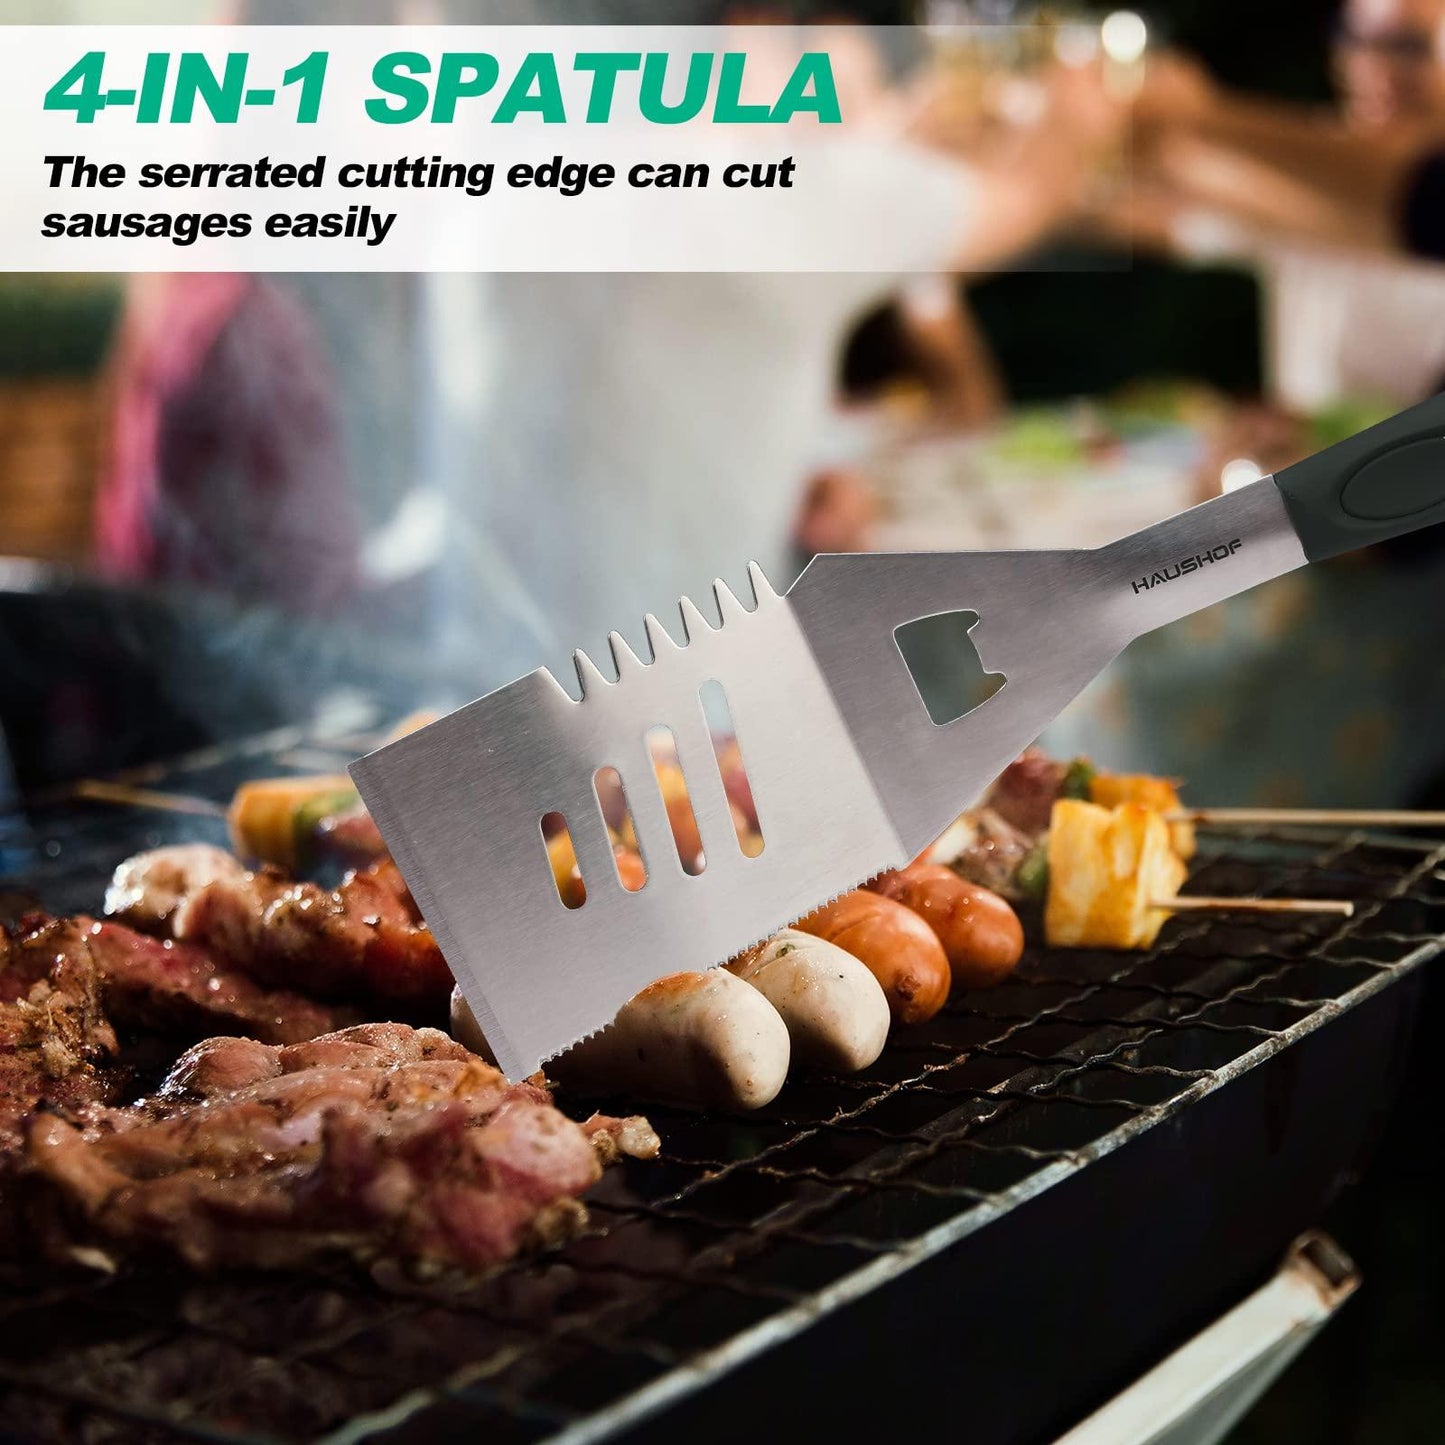 HAUSHOF Large Grill Accessories Heavy Duty BBQ Set Gifts for Men/Women - Premium Stainless Steel Spatula, Fork & Tongs (16.5/16/16.5 in.), Barbecue Utensils Tool Kit Gift for Grilling Lover Outdoor - CookCave